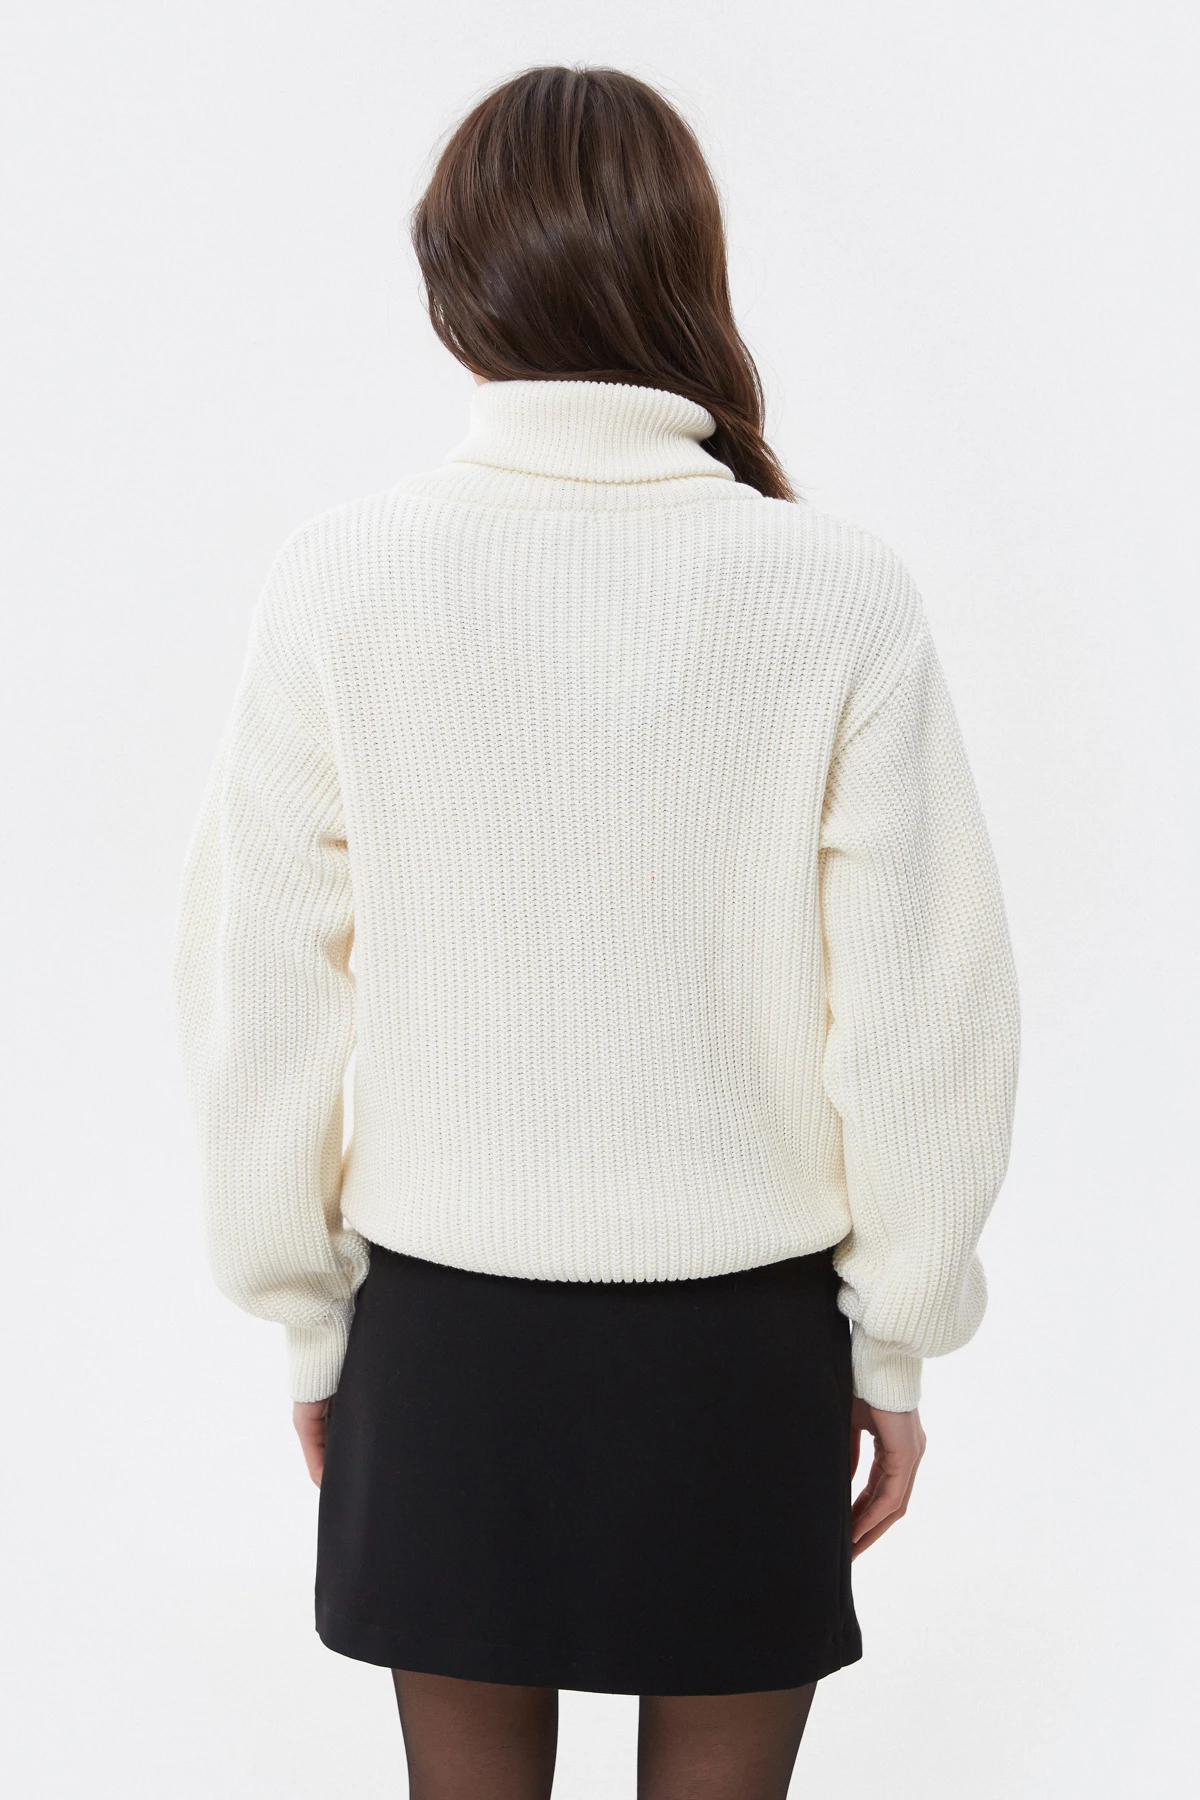 Milky cotton zip-up knit sweater, photo 5